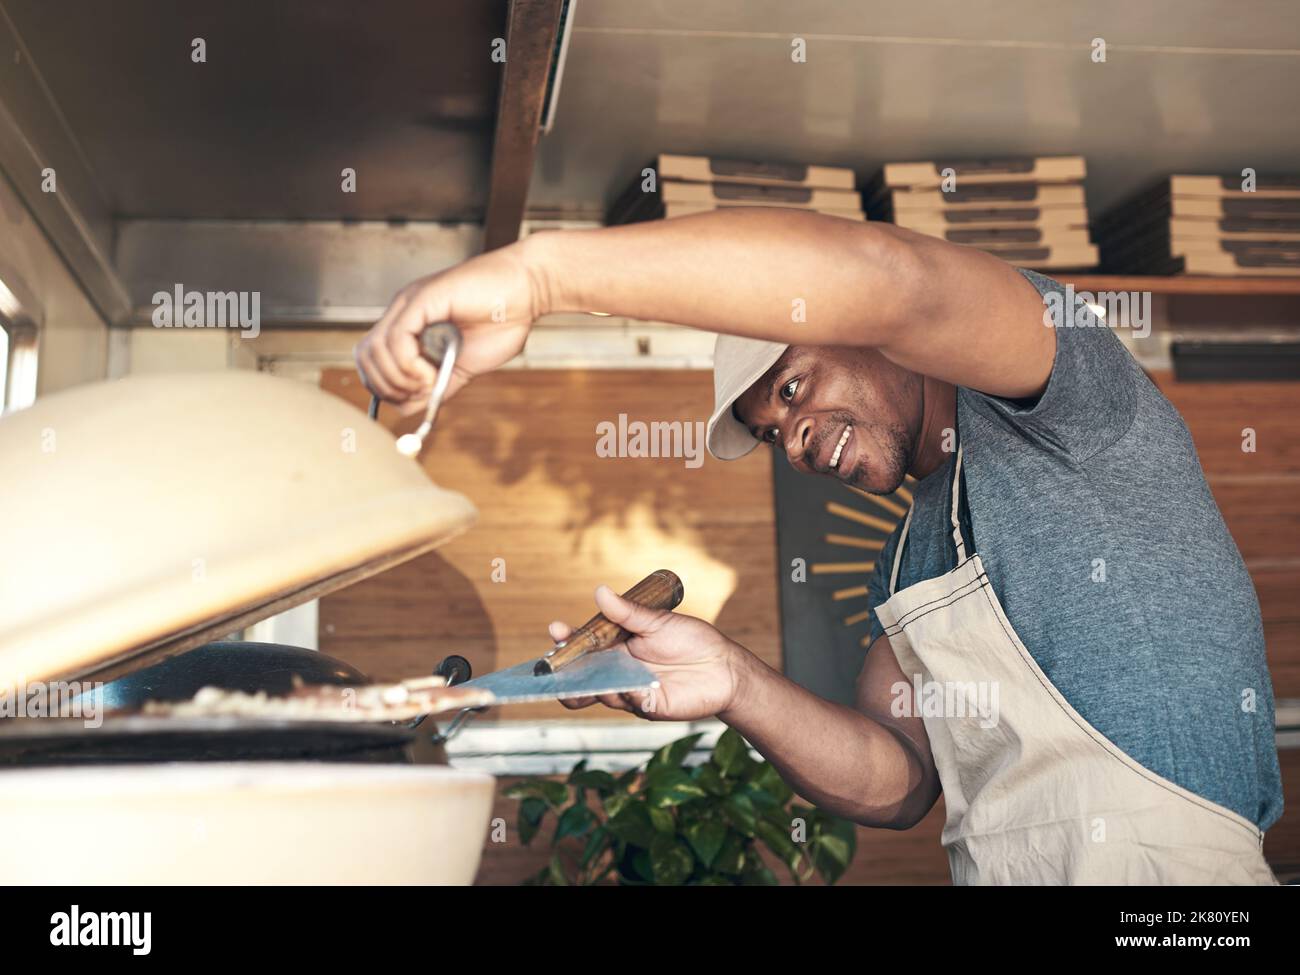 Lets get cooking. a handsome young man standing alone and putting a pizza in the oven at his restaurant. Stock Photo